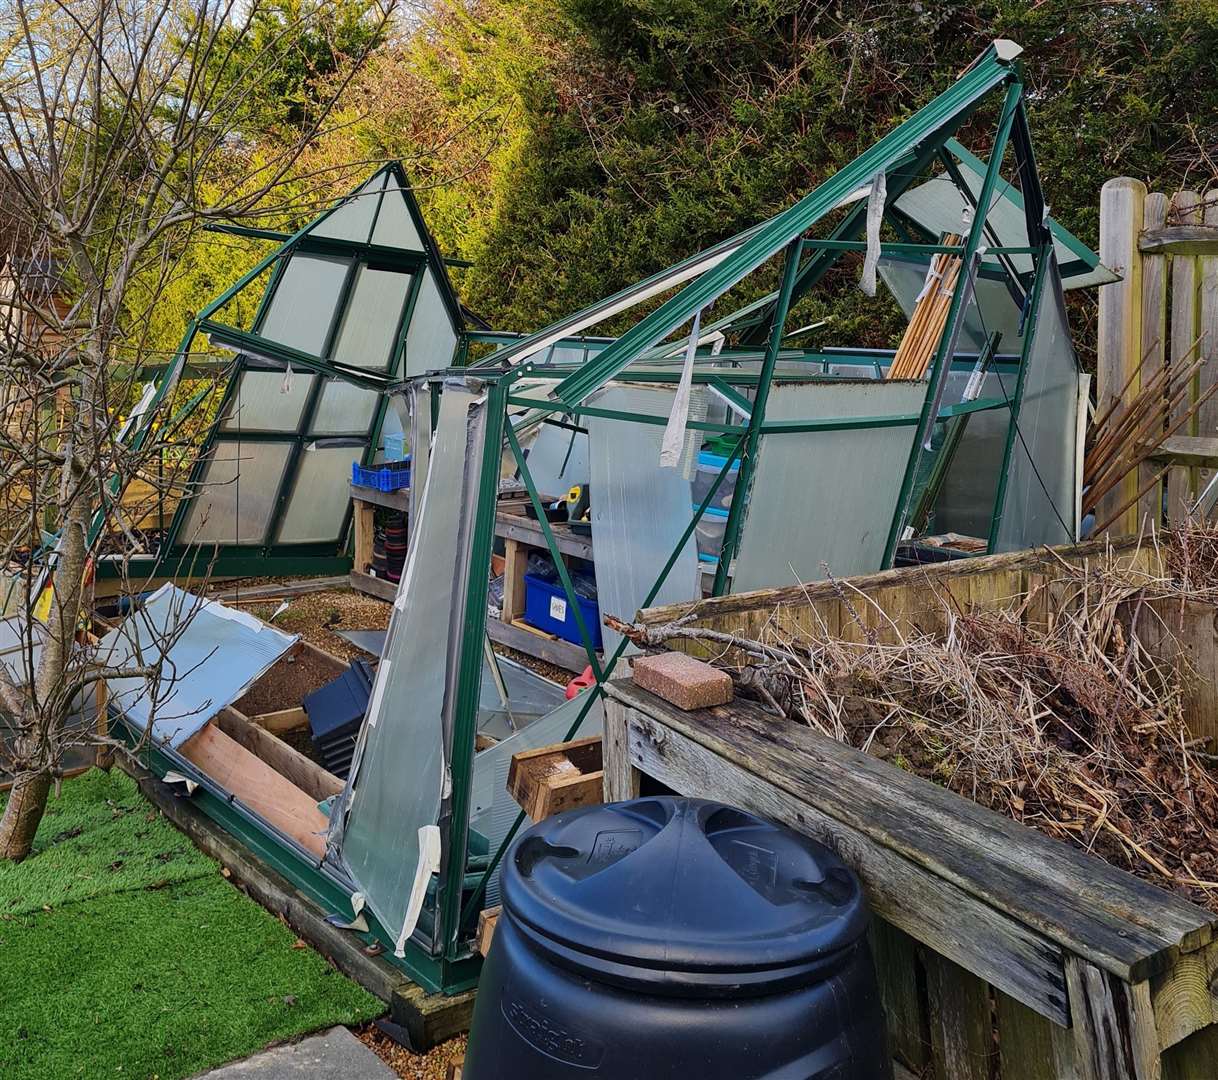 The school's greenhouse collapsed in the storm